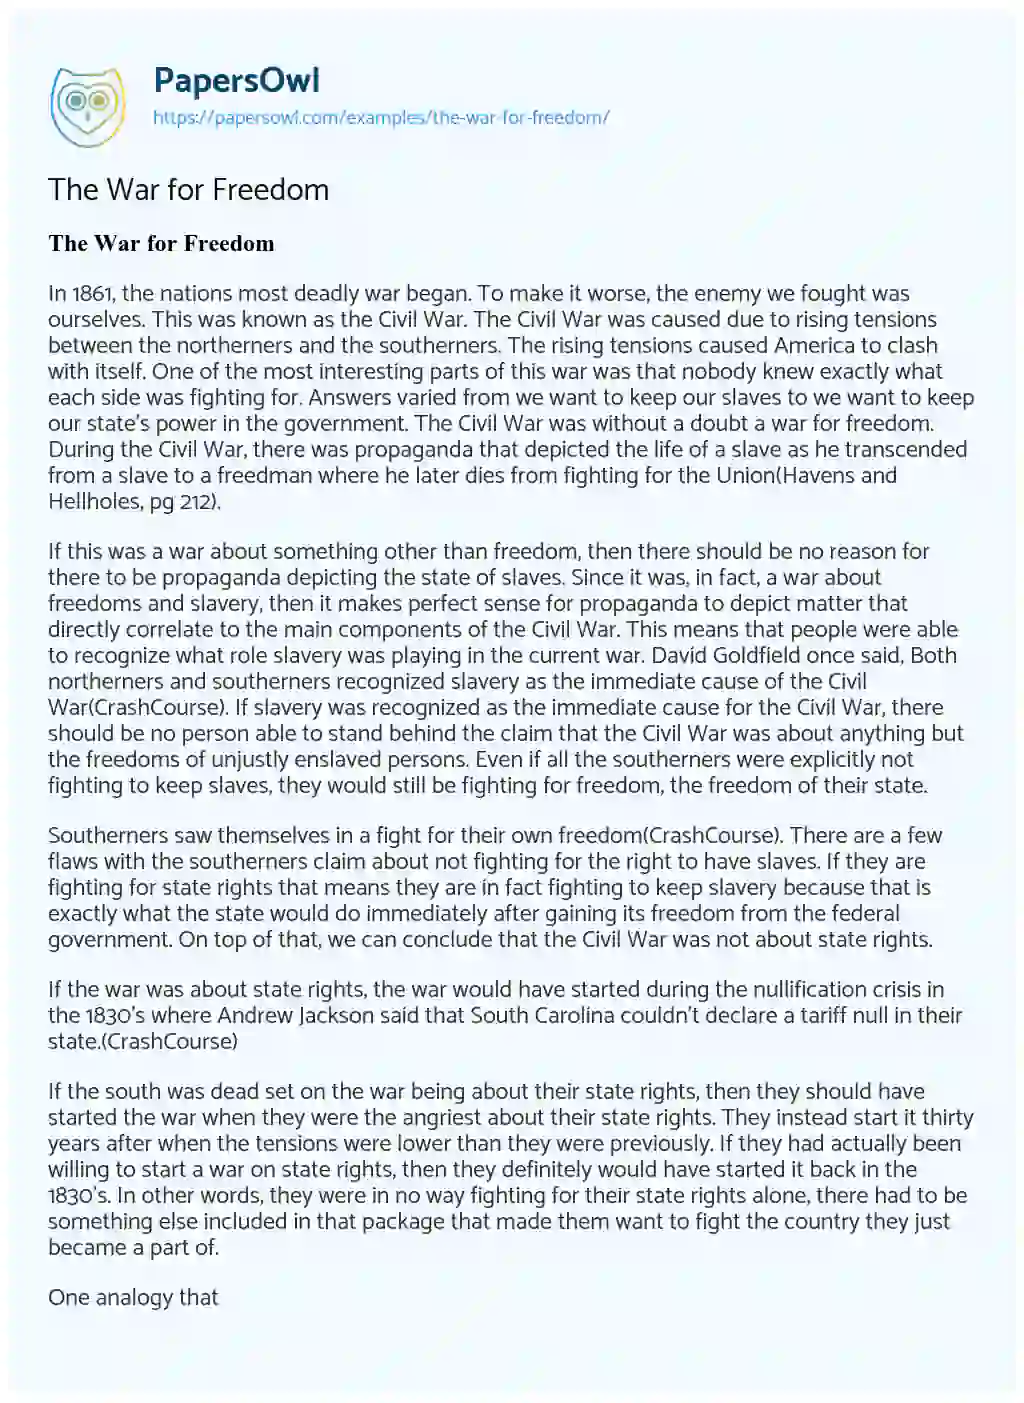 Essay on The War for Freedom